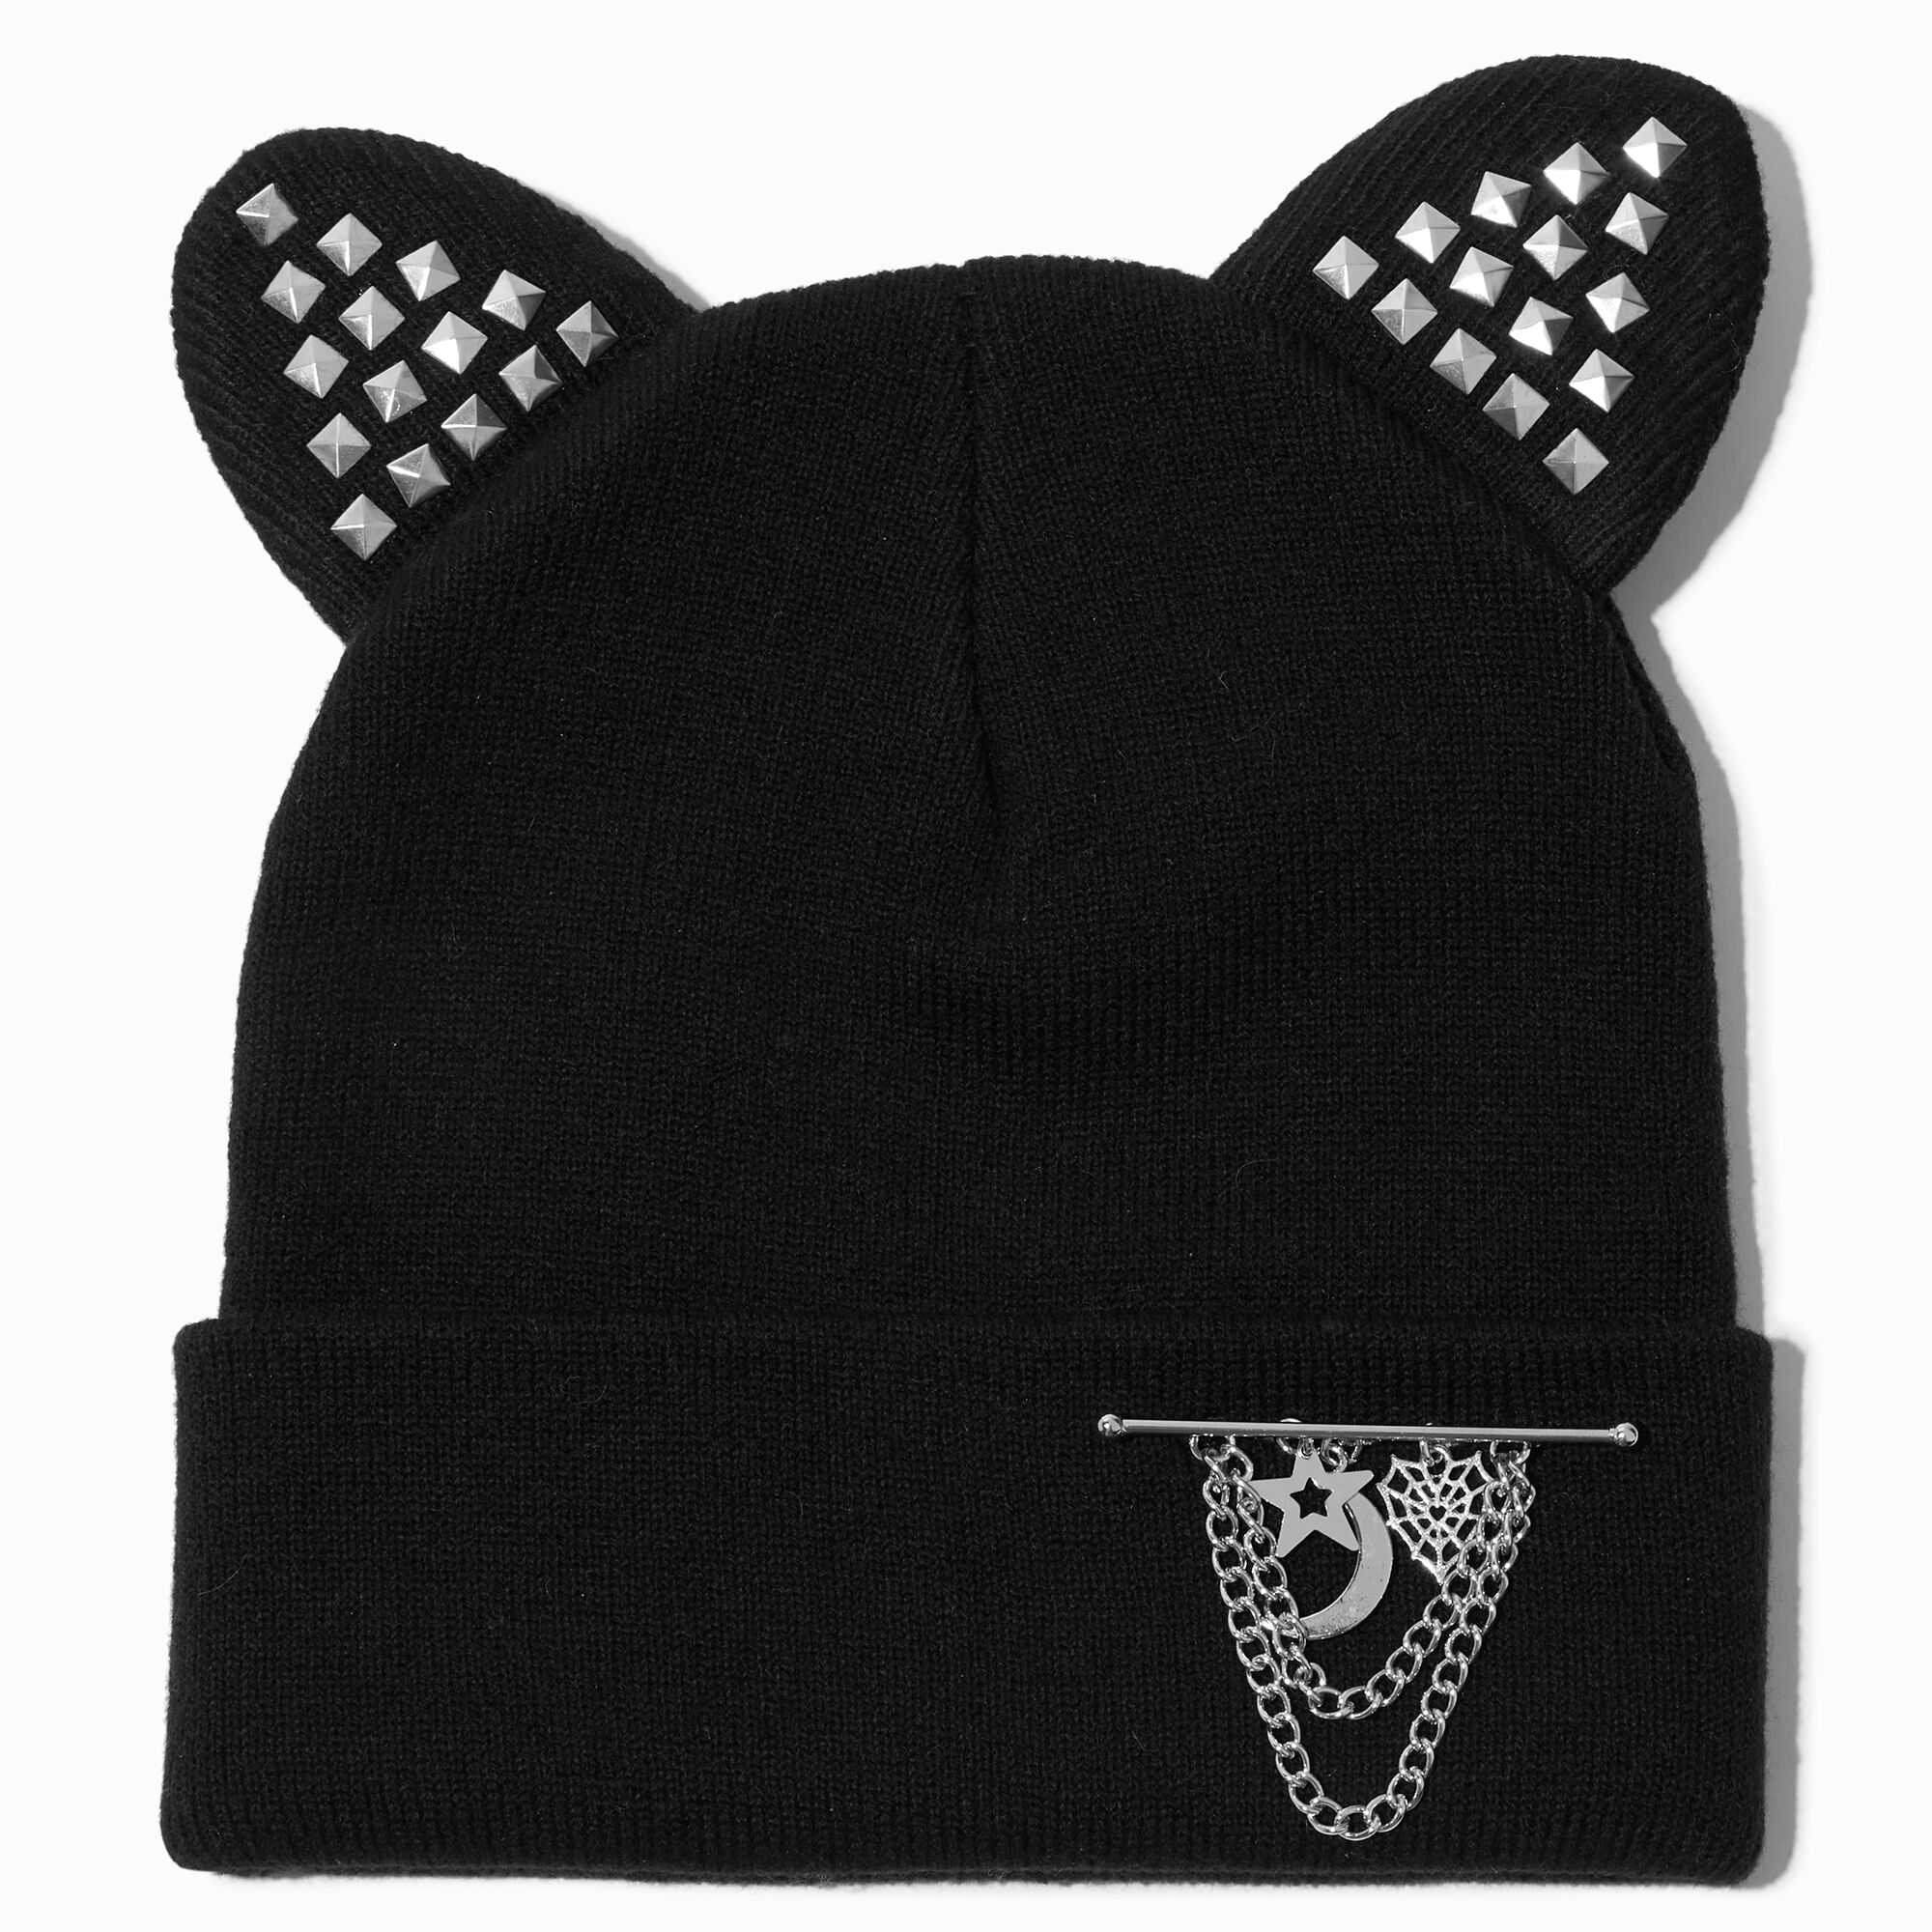 View Claires Studded Cat Ears Knit Beanie Hat Black information